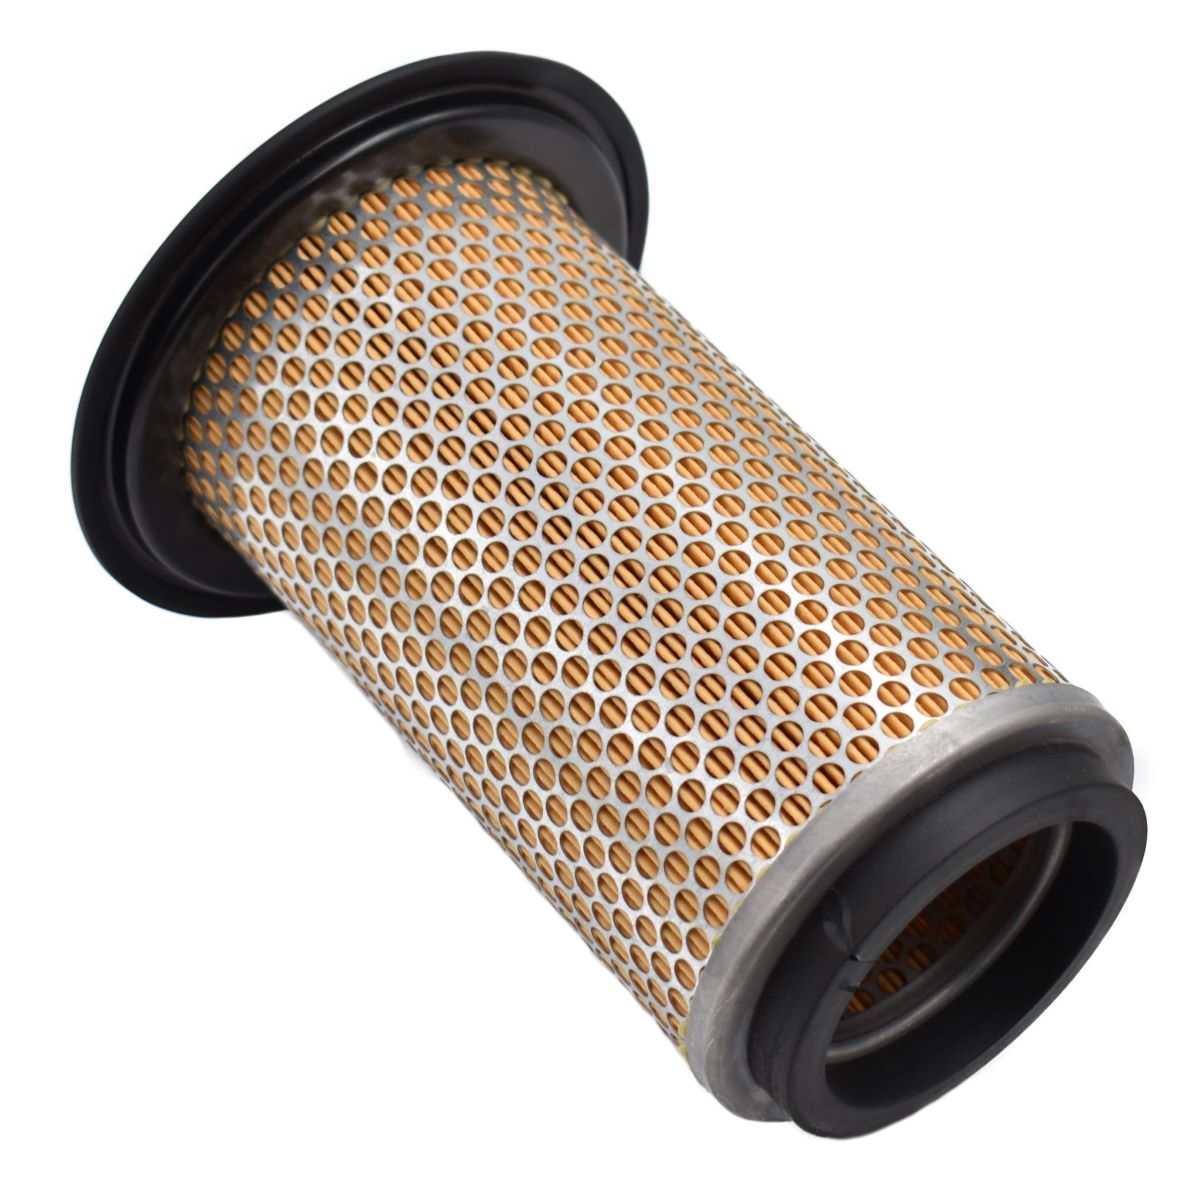 Airfilter TF19 (Sial) Iseki TF: (Sial) TF19 Dimensions: Length: 200mm Dimensions outside: 104mm Diameter inside: 65mm 3656-301-2130-0 3656-301-213-00 365630121300